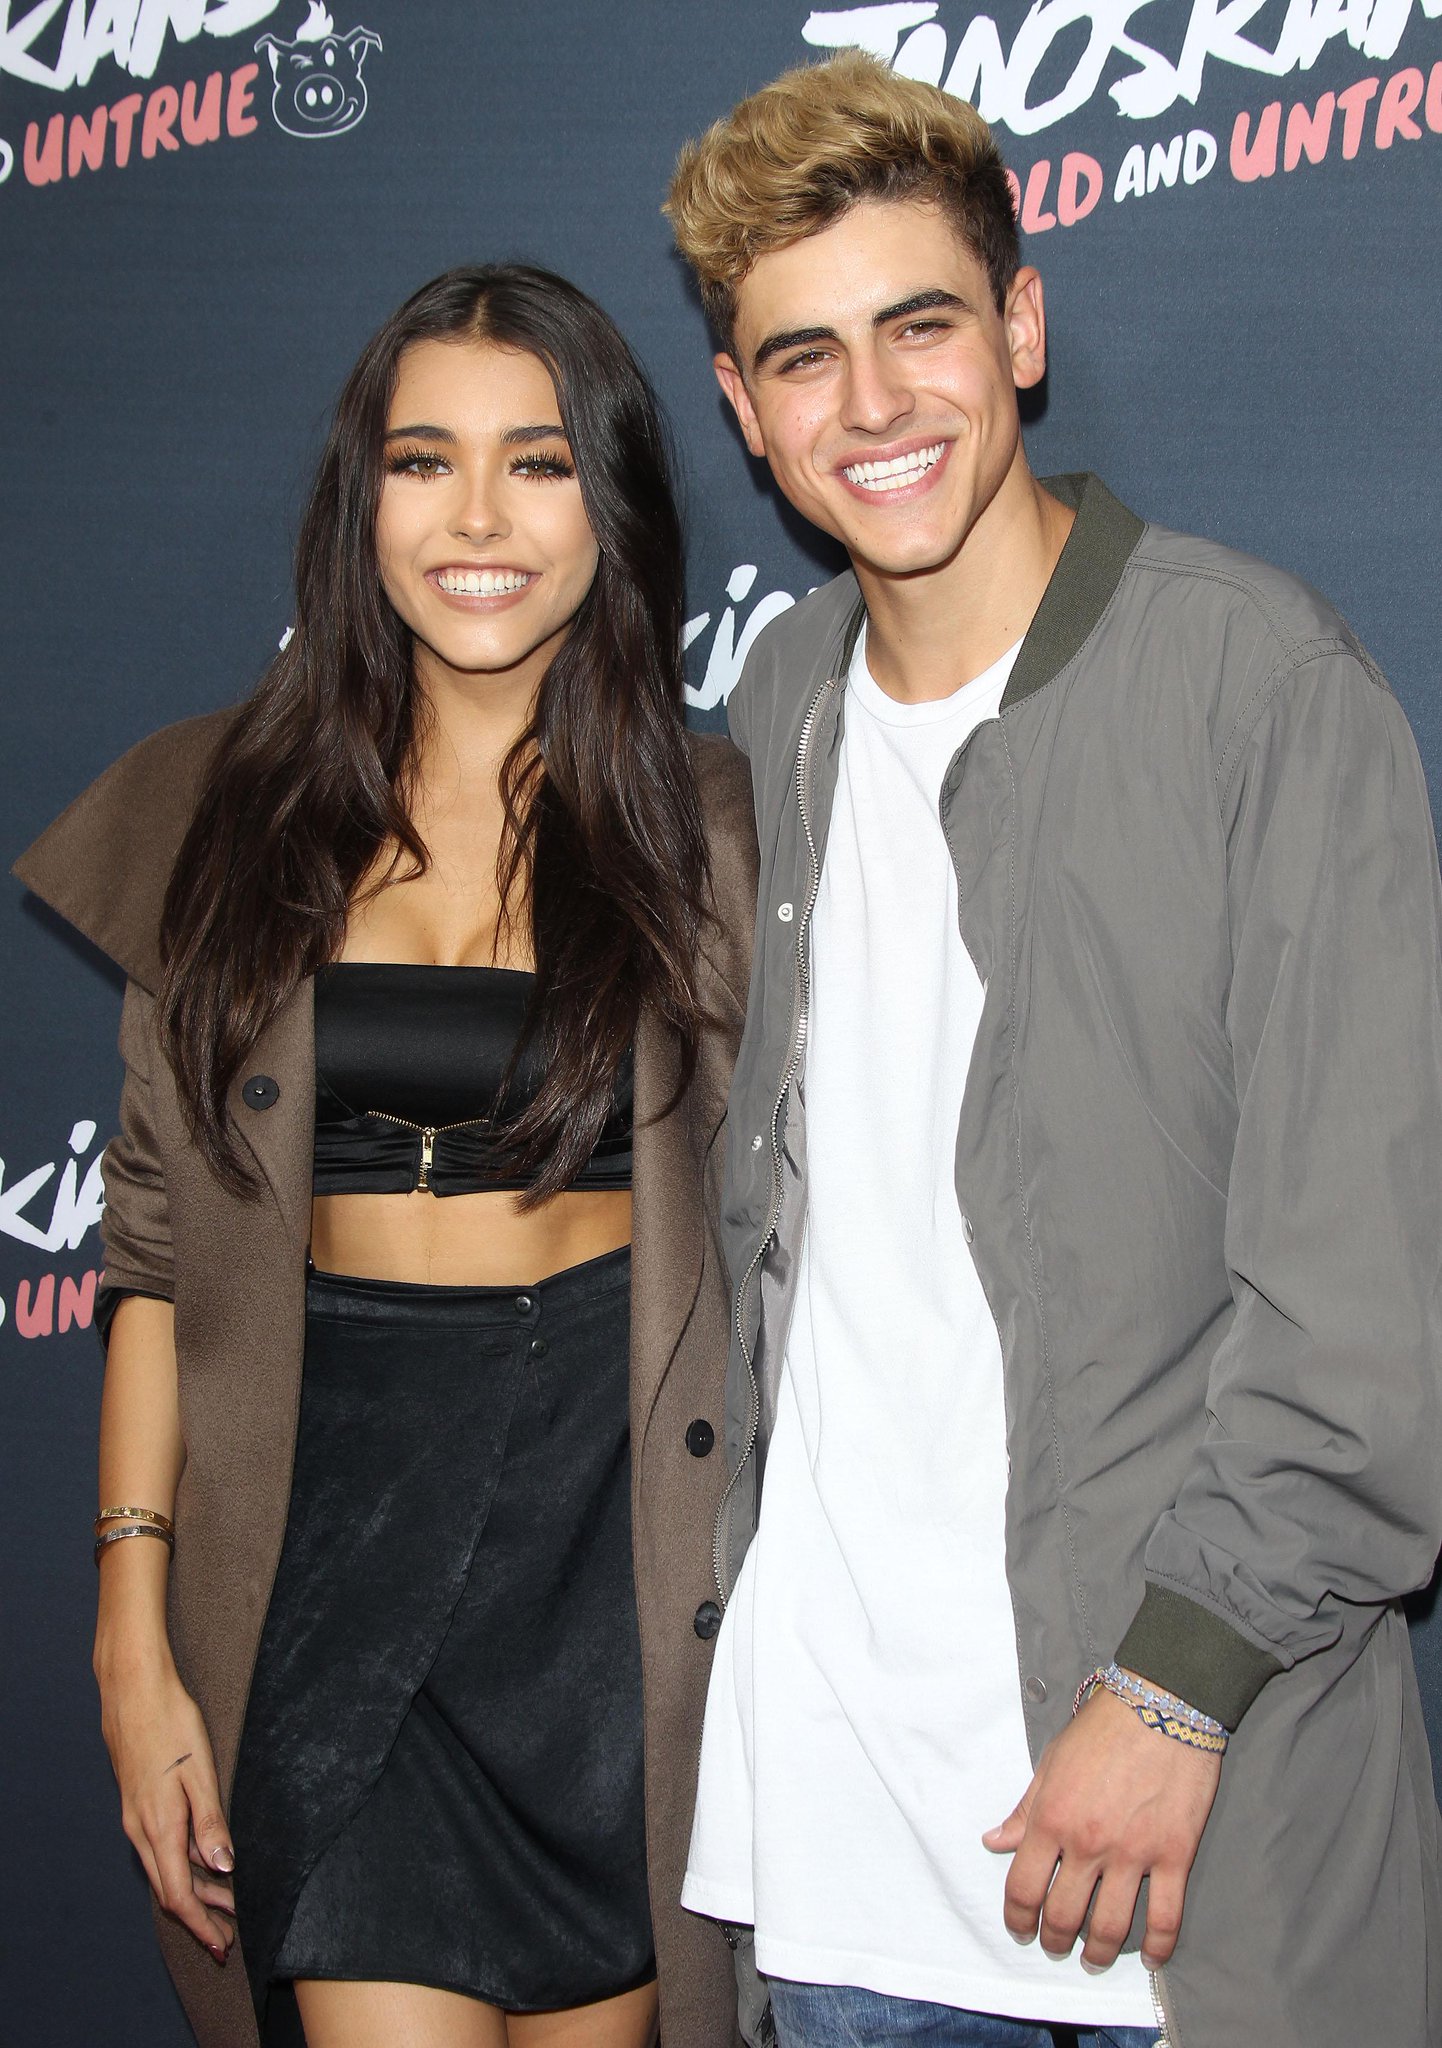 Jack And Jack Updates On Twitter Hq Jack Gilinsky And Madison Beer At 